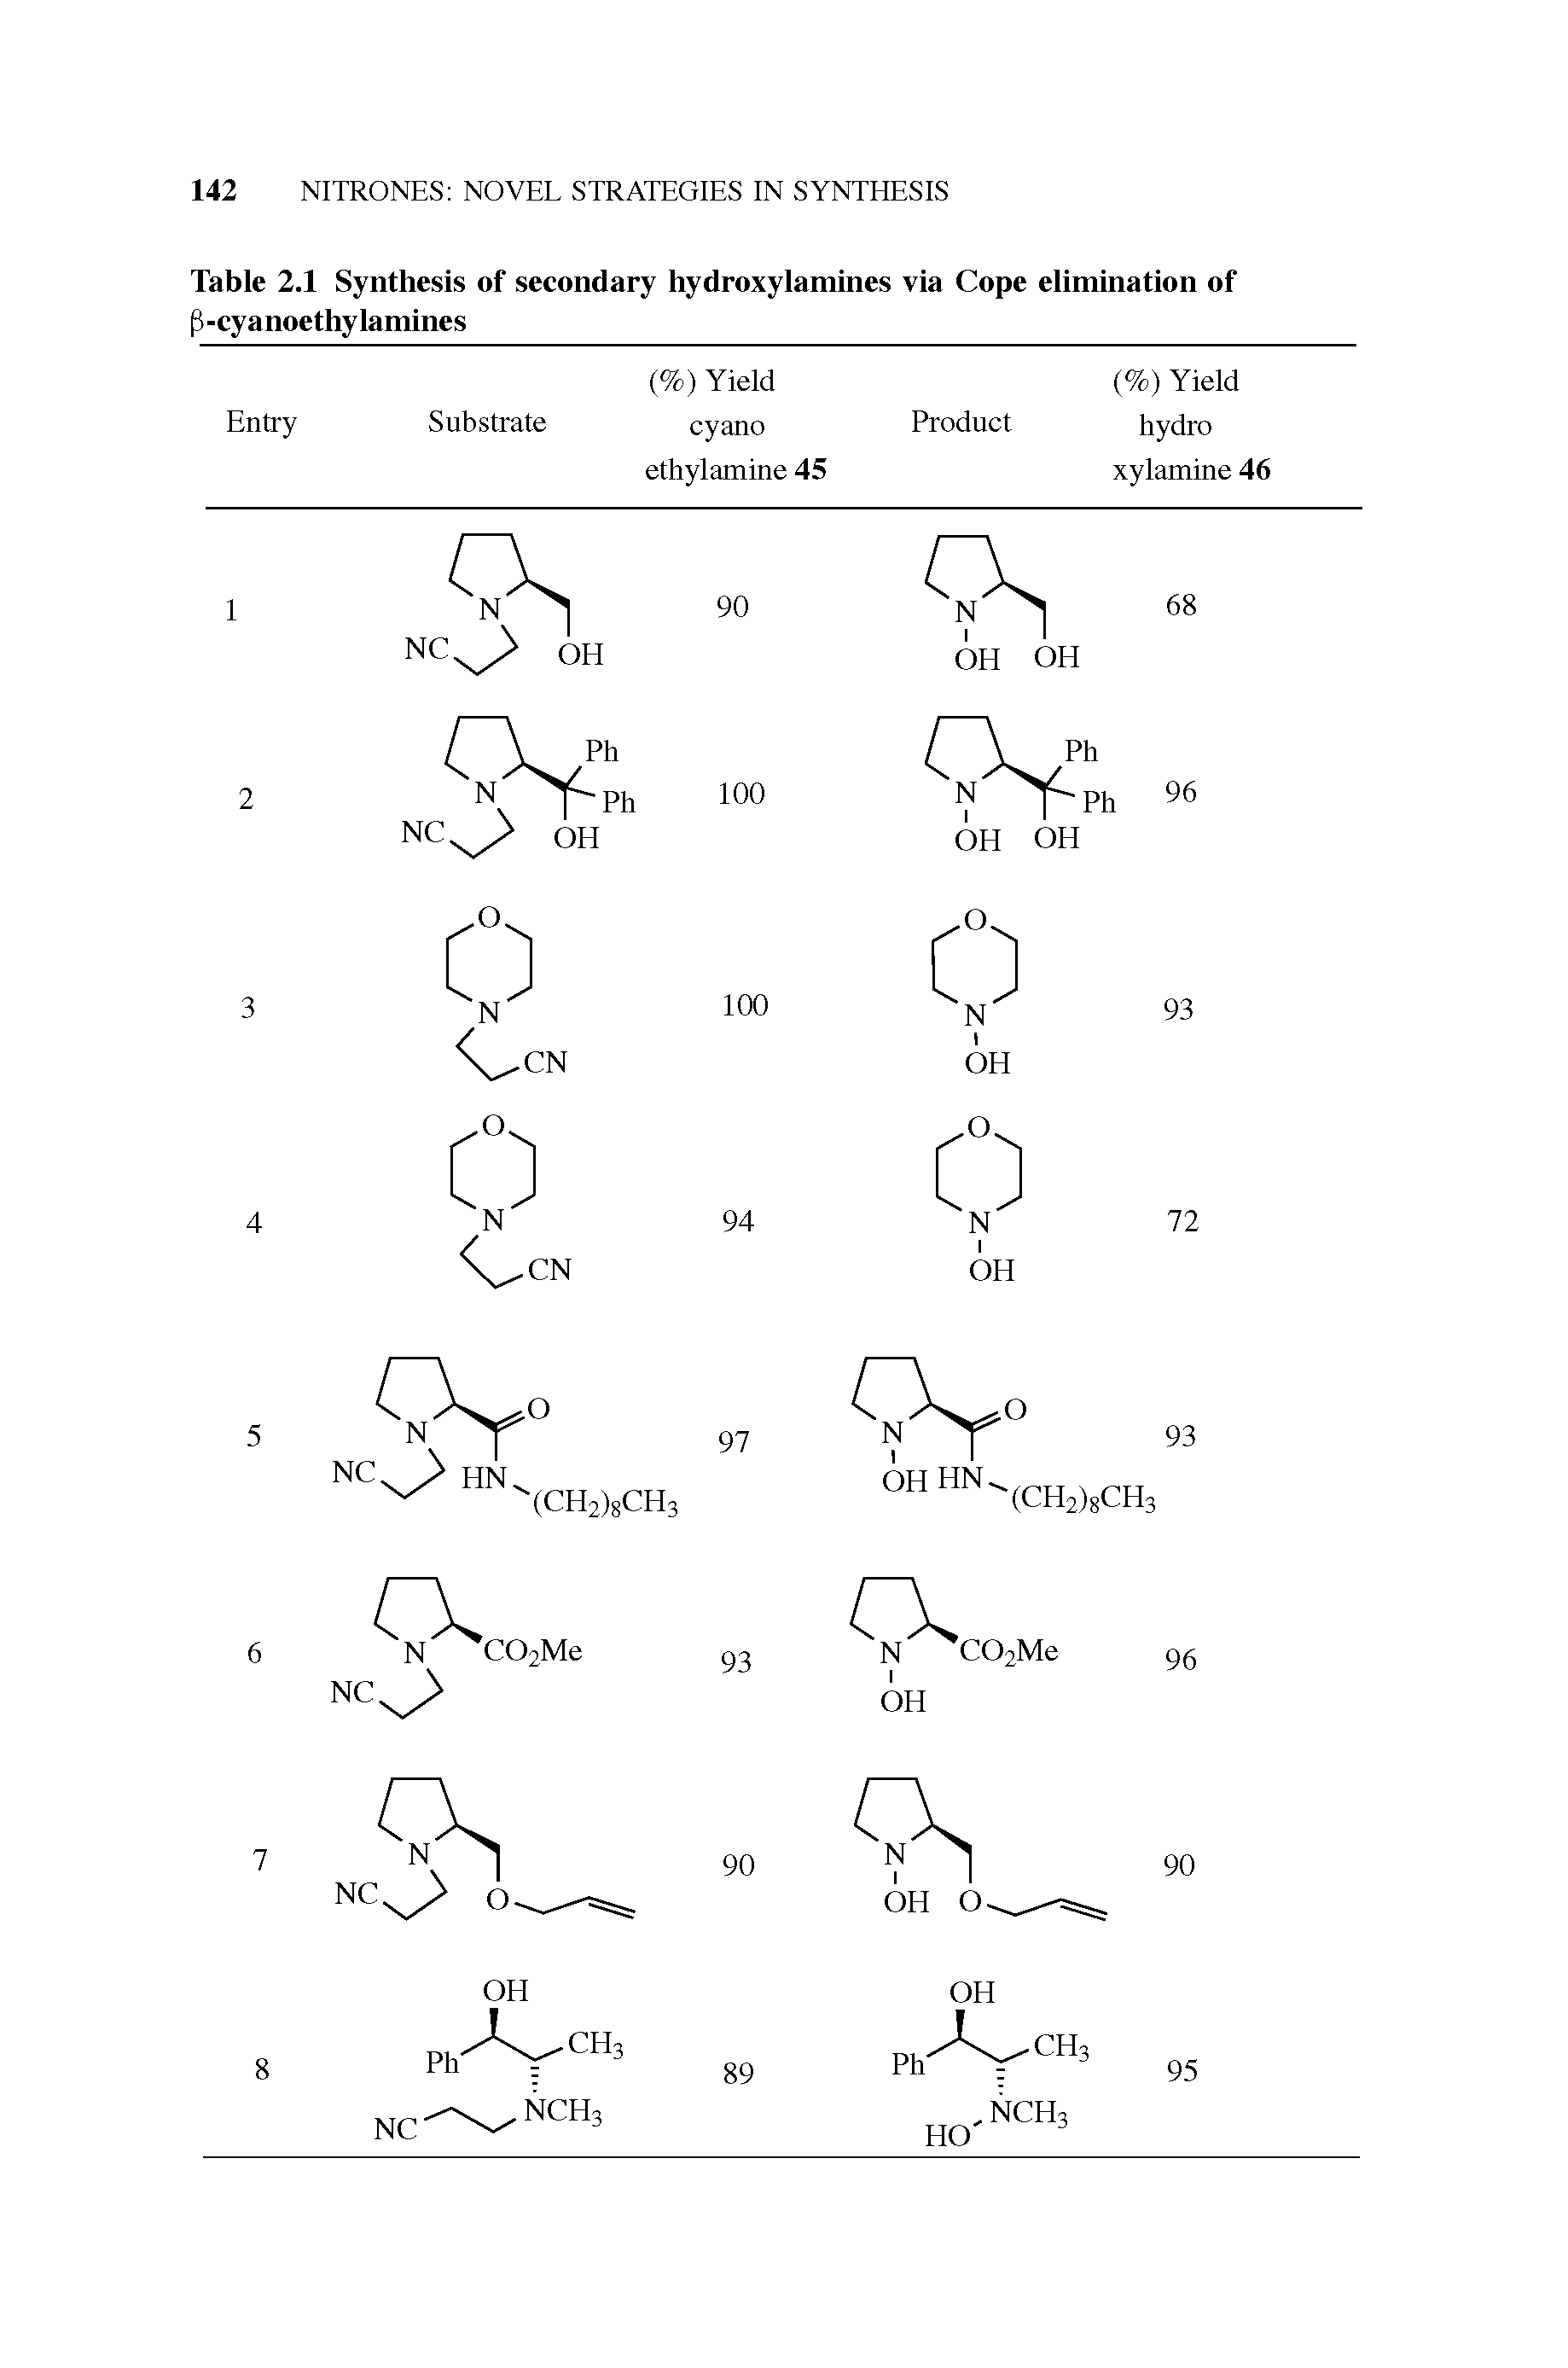 Table 2.1 Synthesis of secondary hydroxylamines via Cope elimination of...